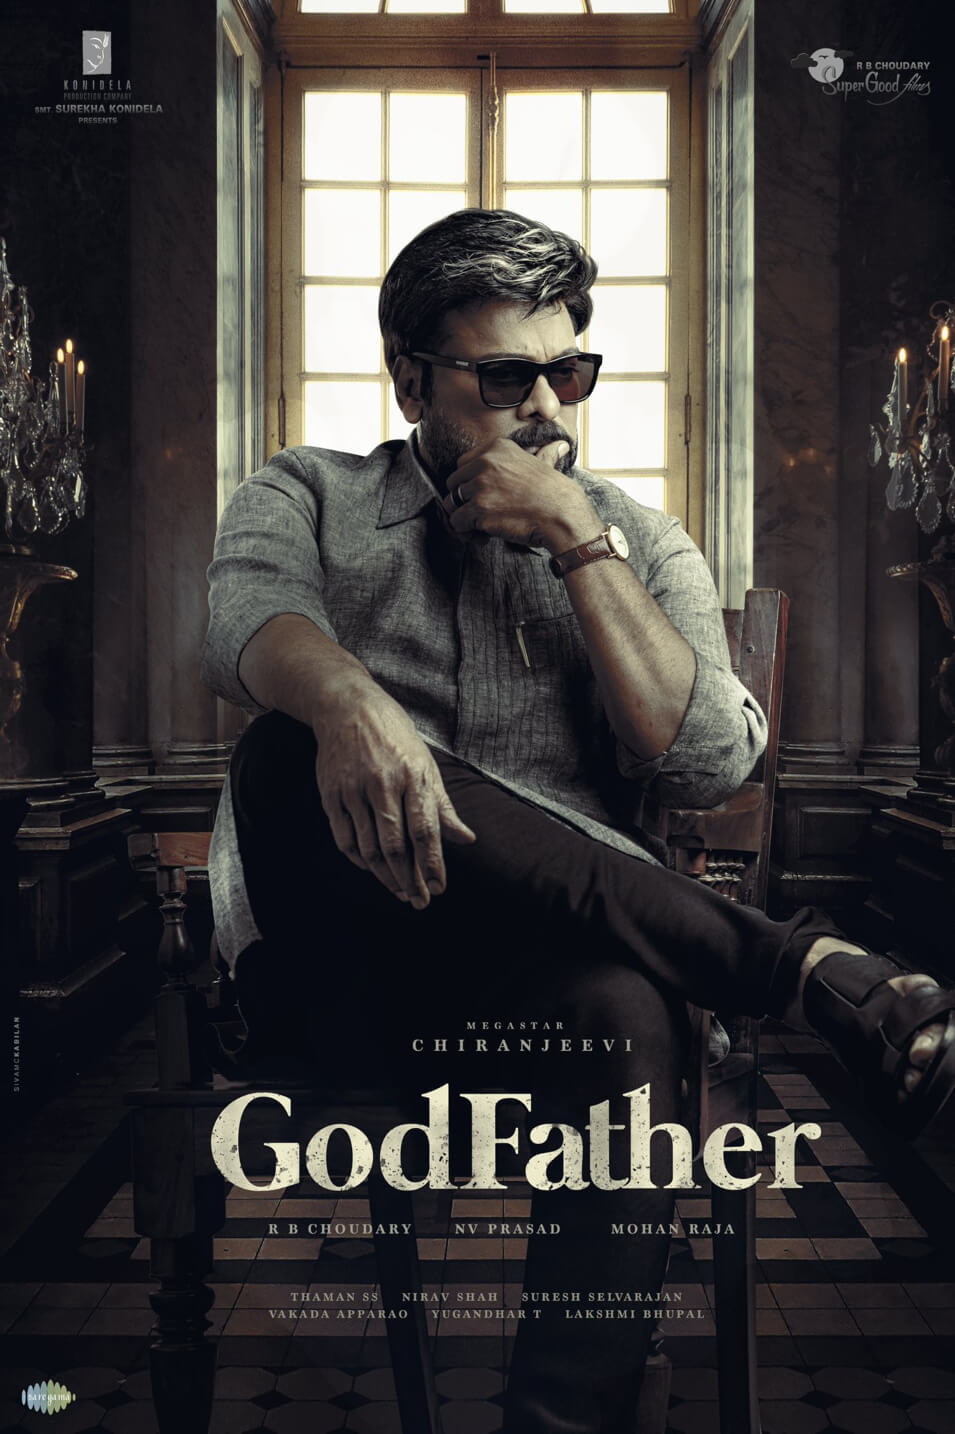 Godfather Movie (2022) Cast & Crew, Release Date, Story, Review, Poster, Trailer, Budget, Collection